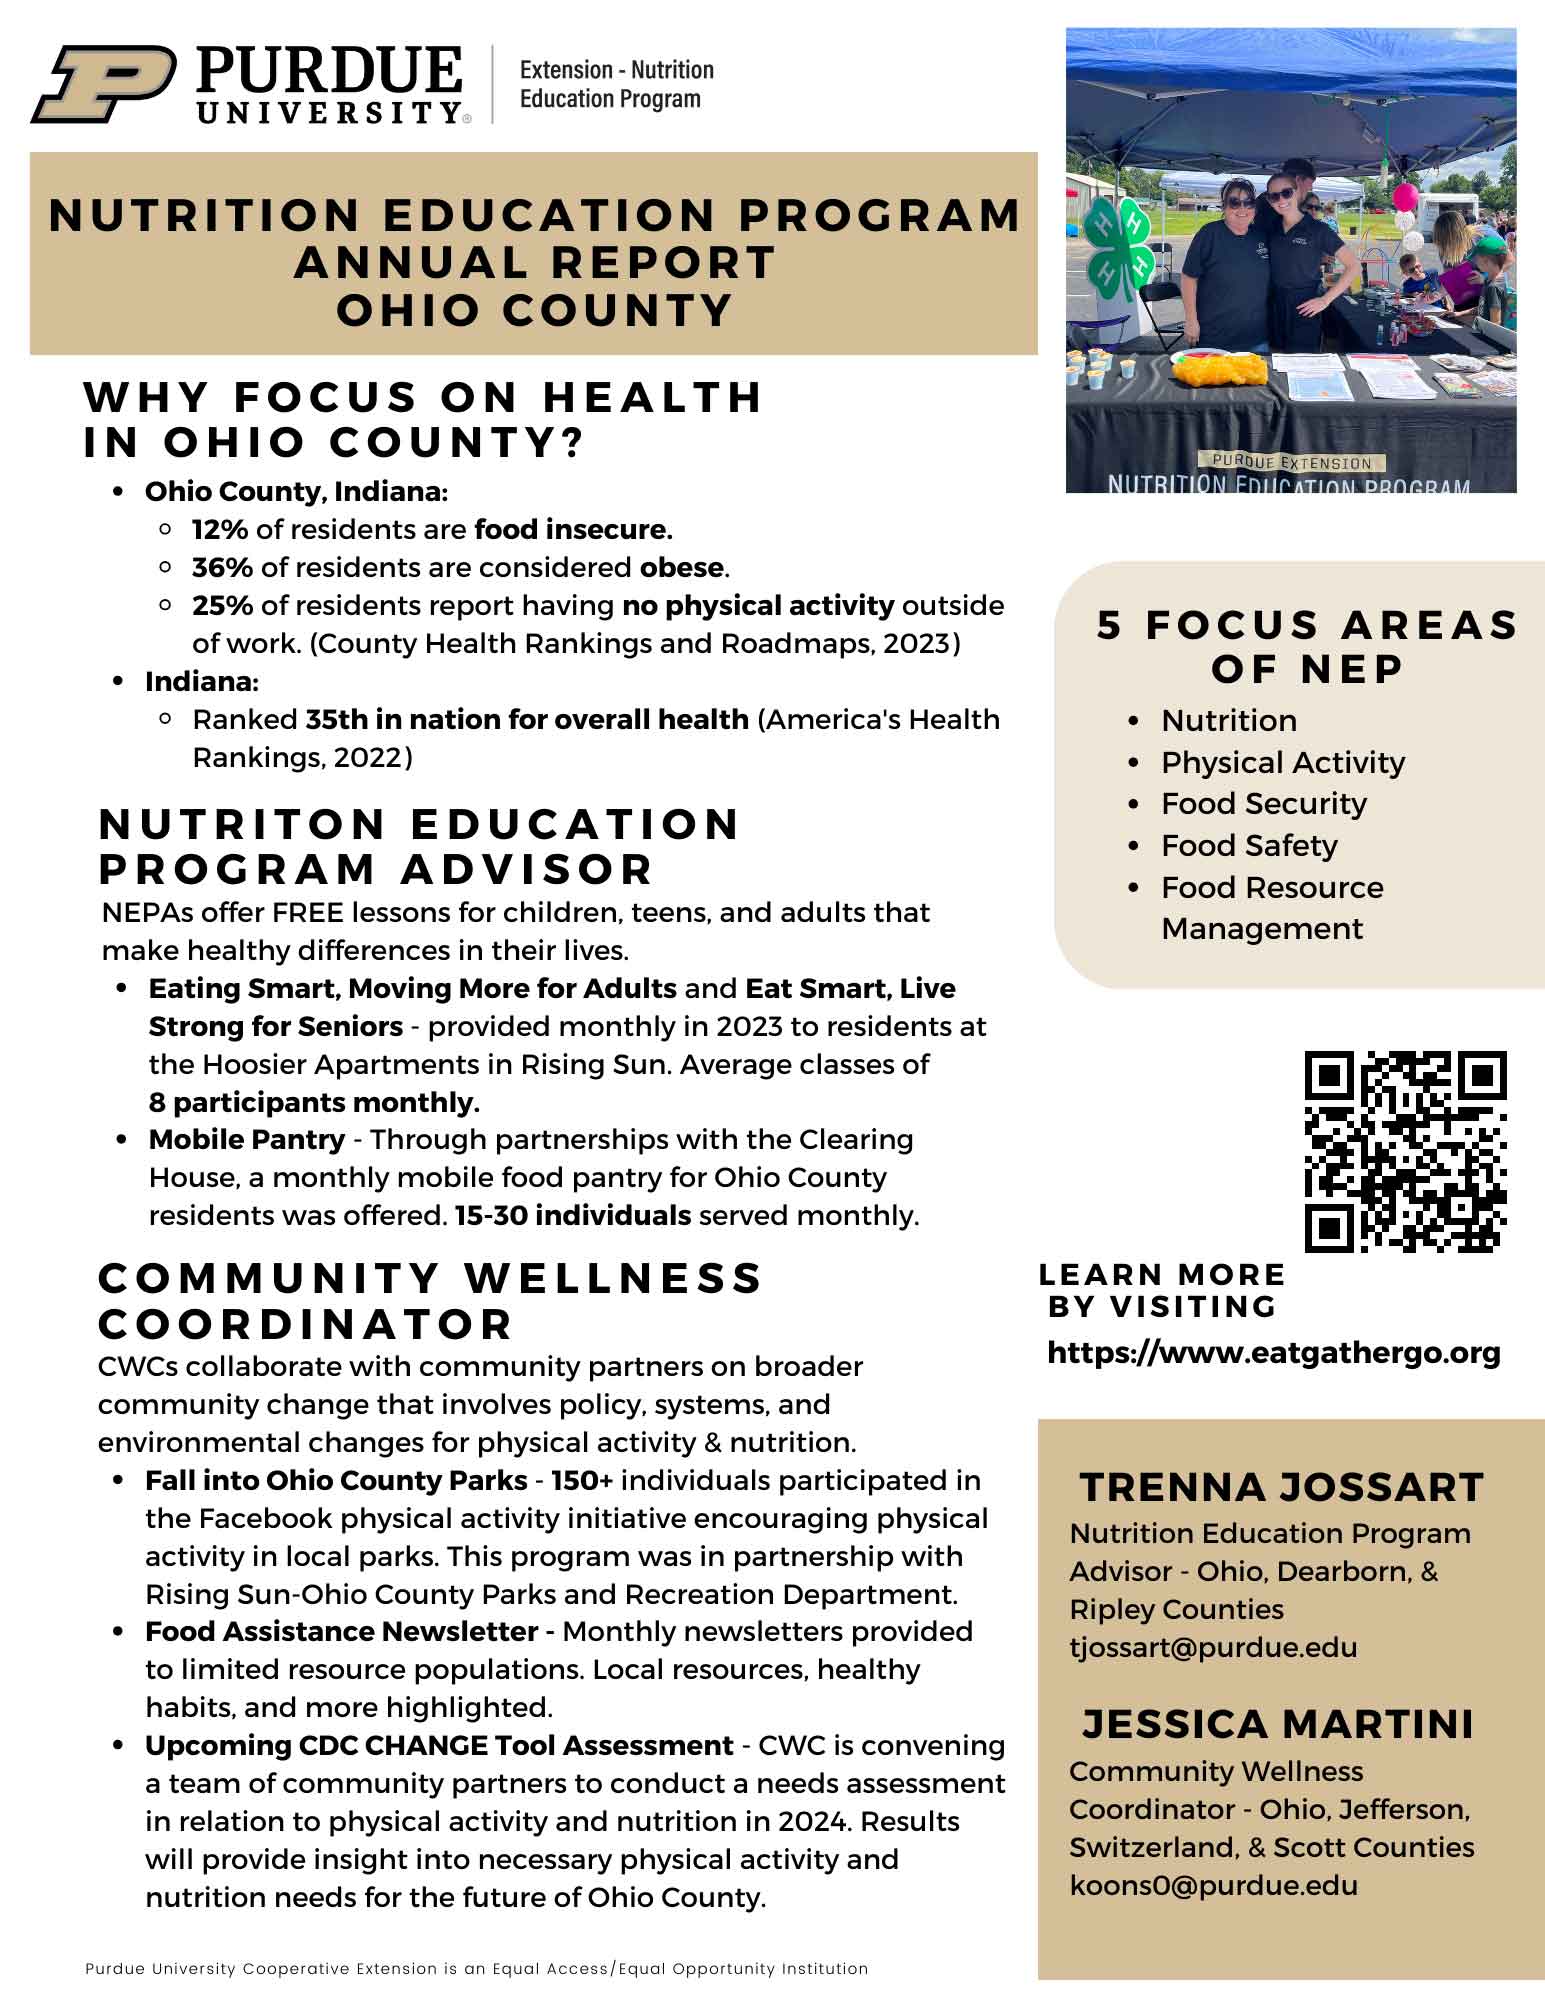 nep-annual-report-ohio-county-2.png